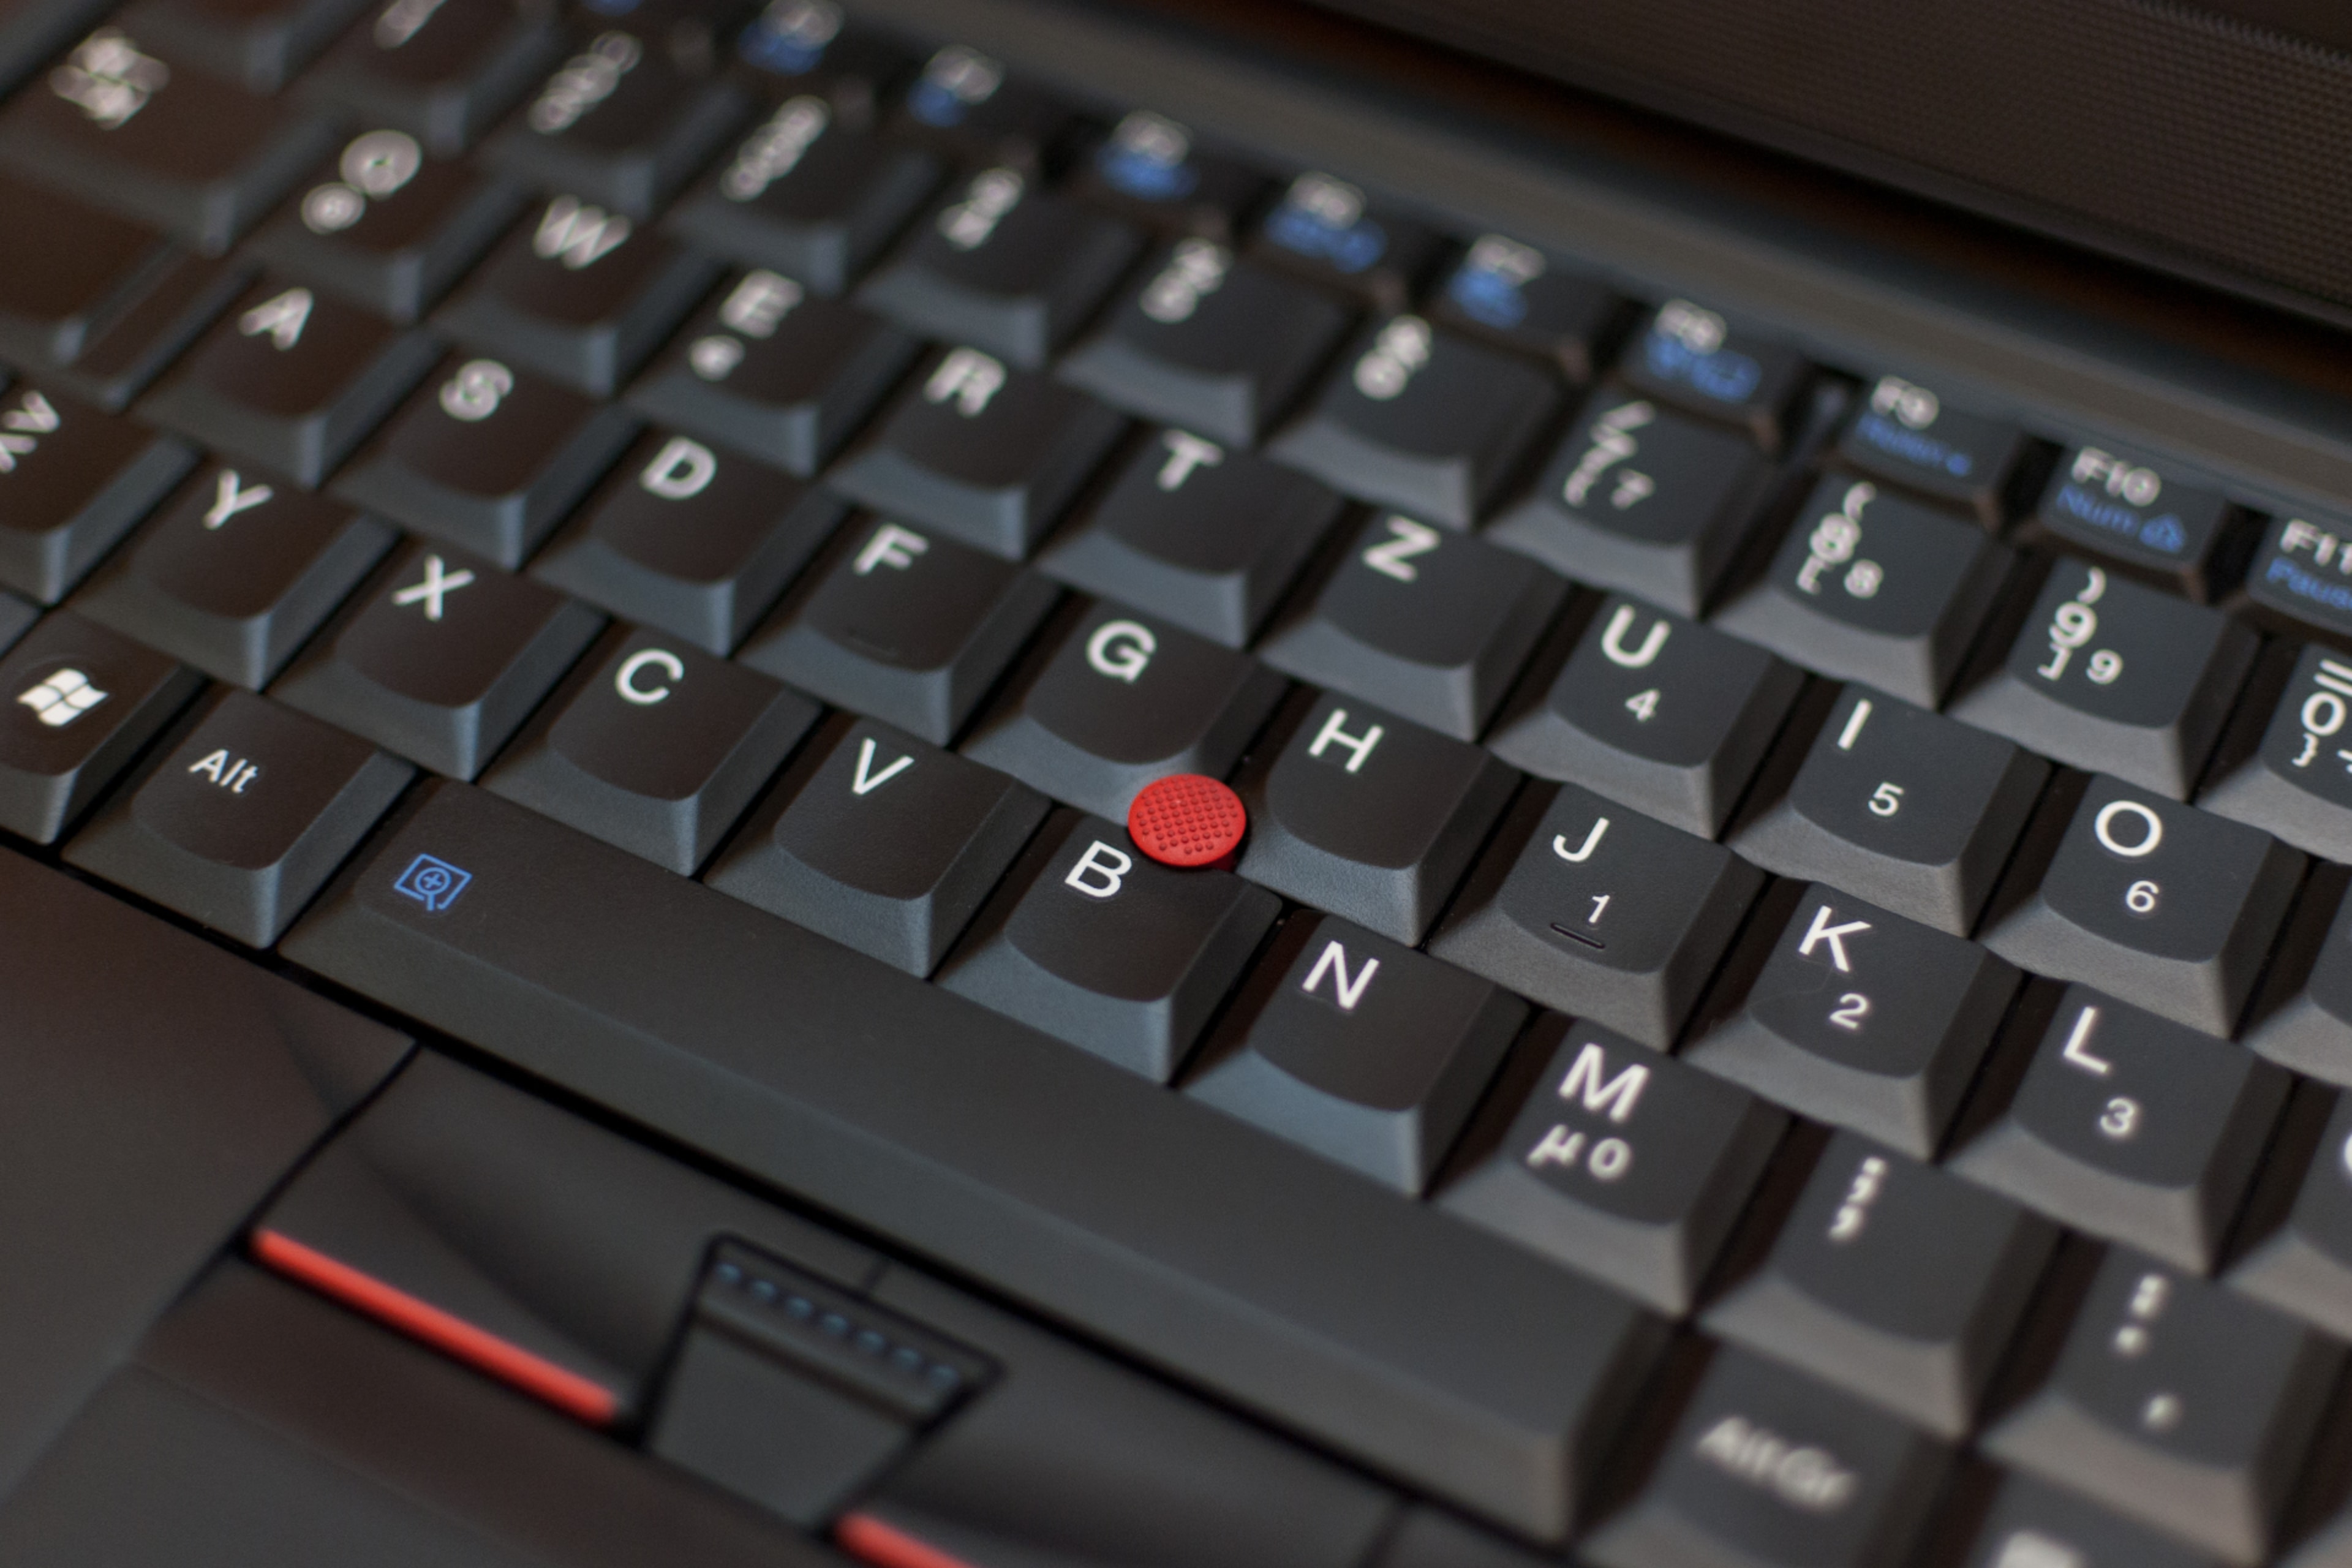 Picture of a ThinkPad laptop's keyboard showing its red Trackpoint.